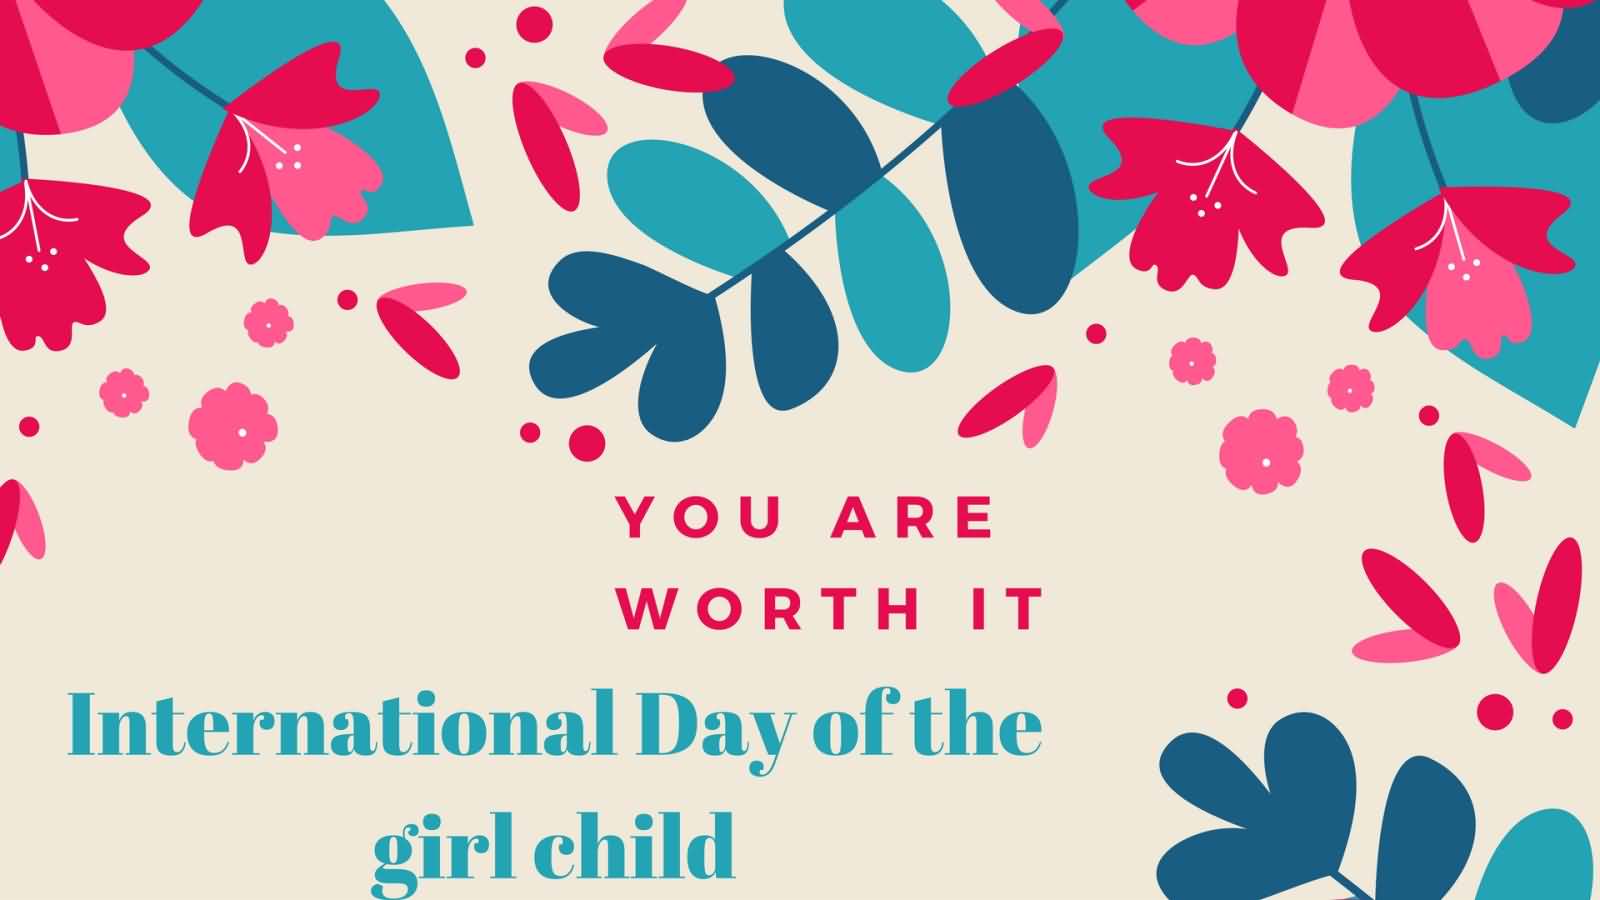 45 Most Amazing International Day of the Girl Child 2017 Greeting Pictures